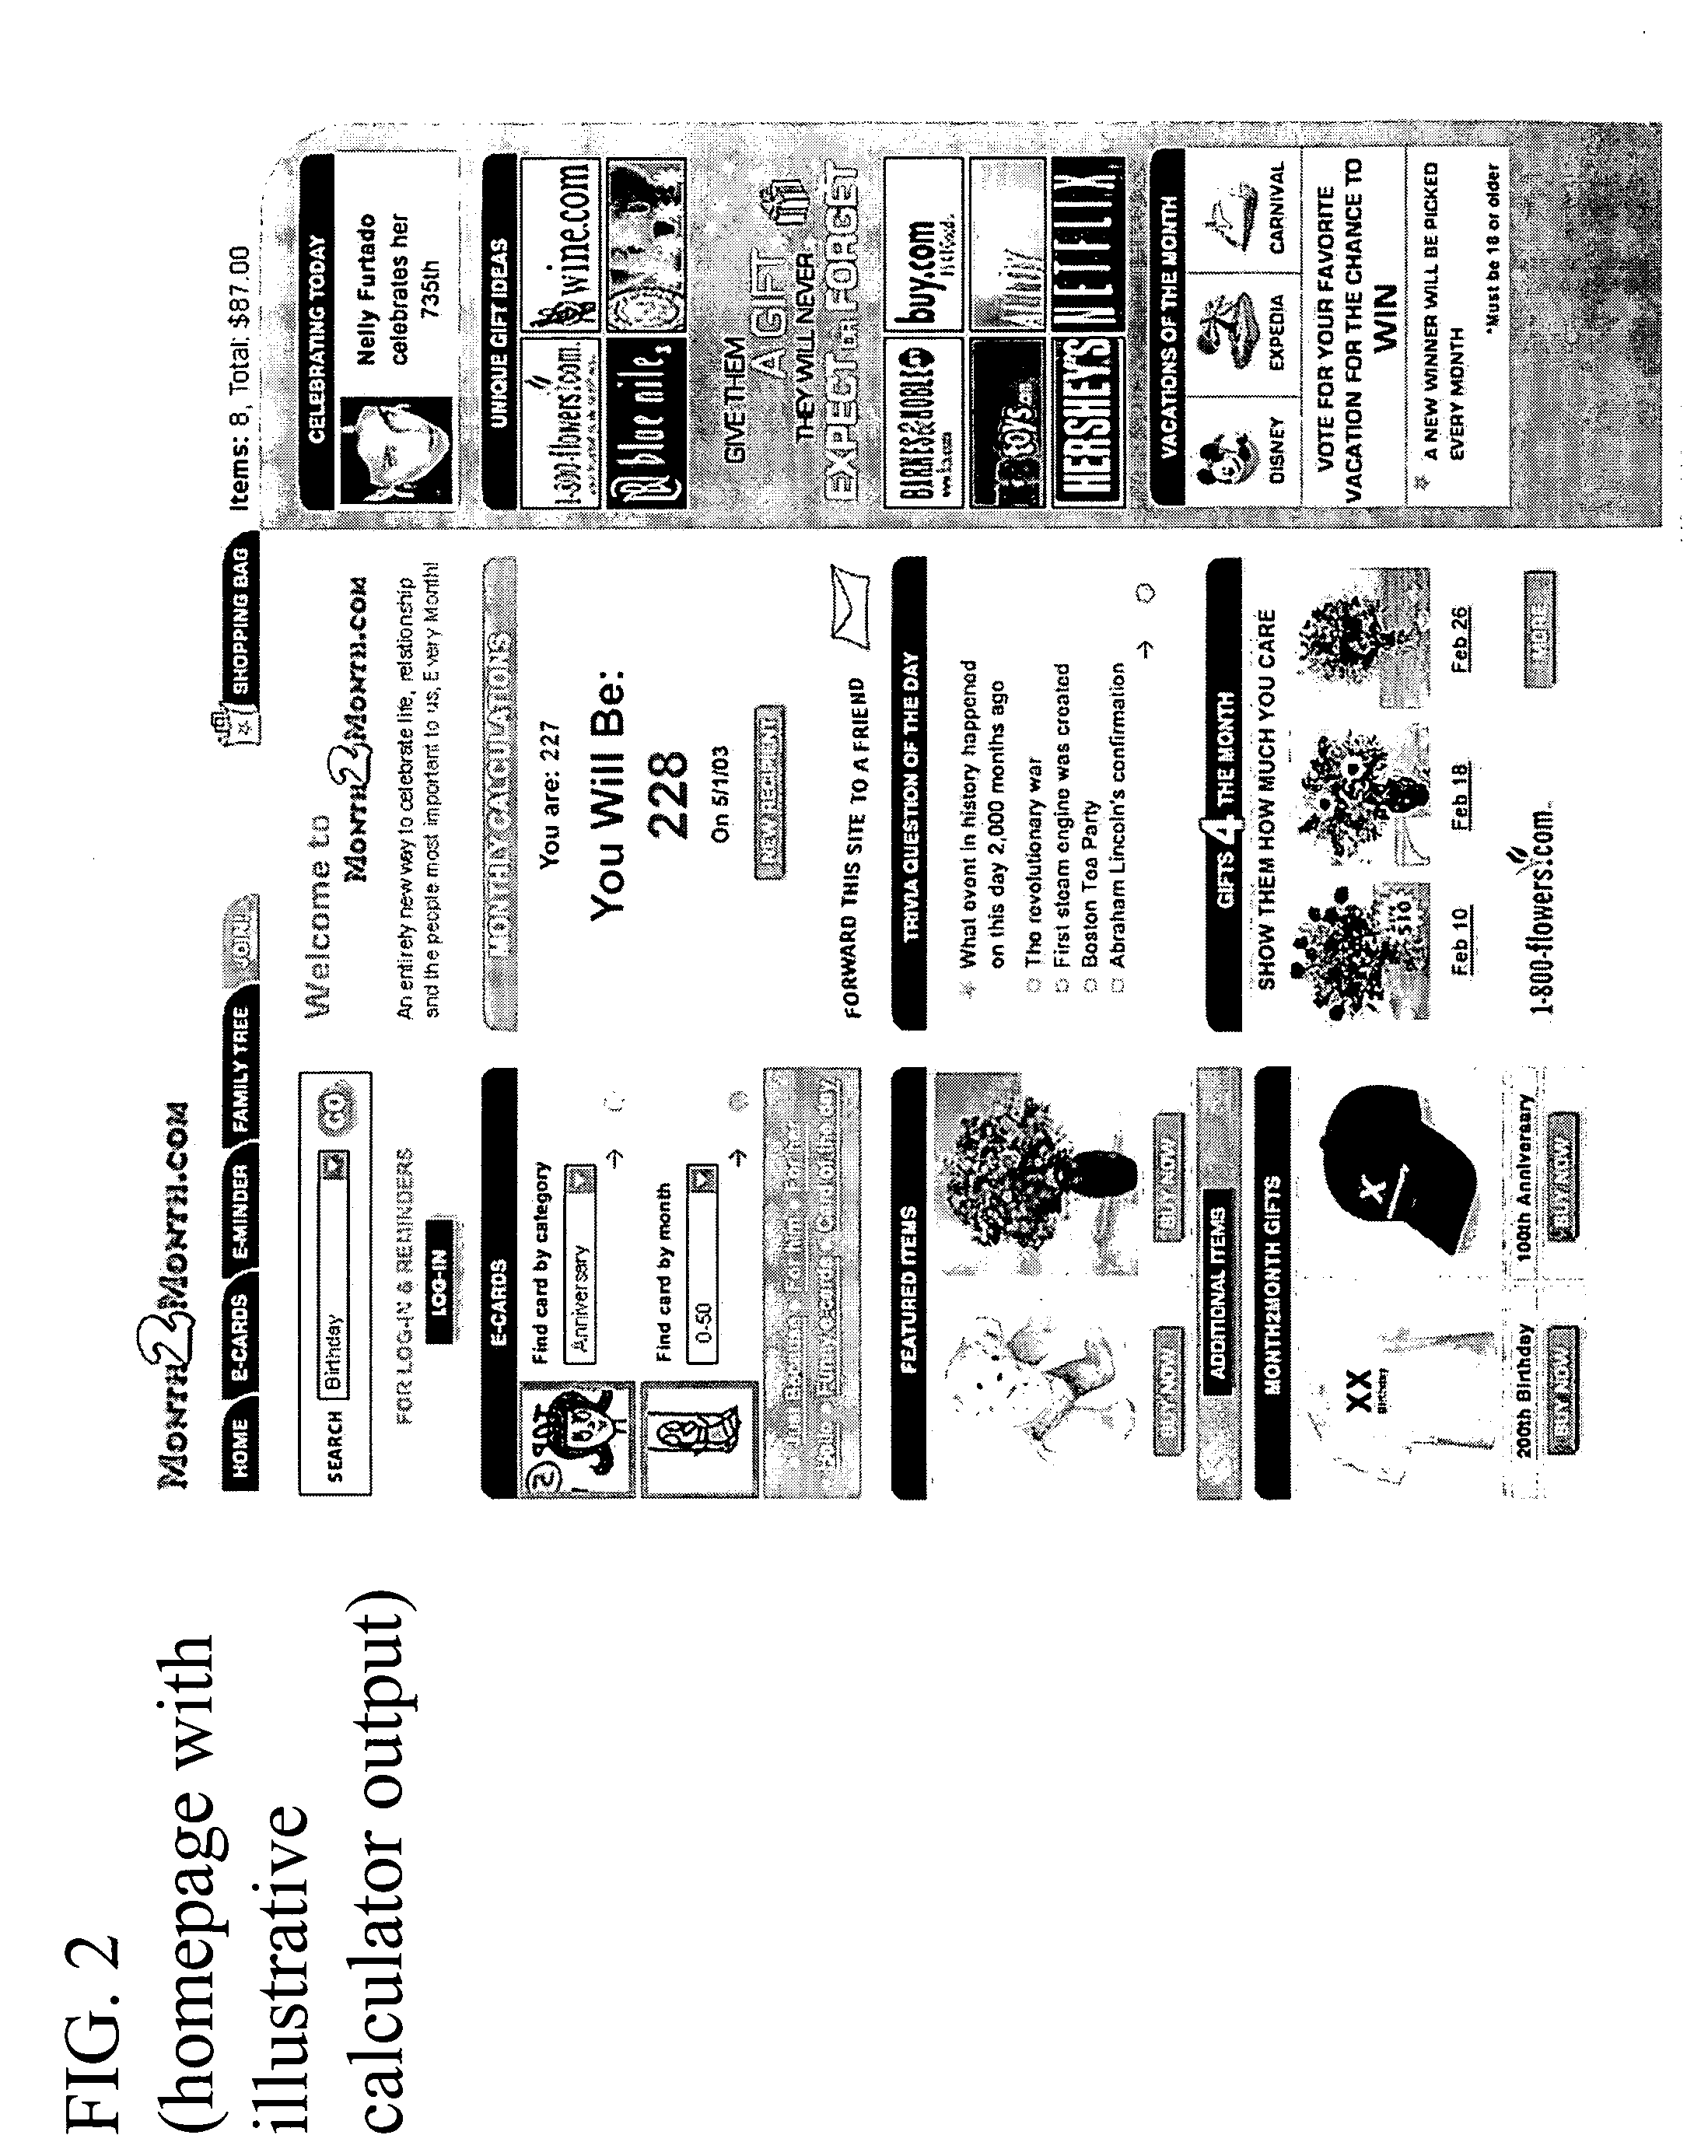 Electronic cards systems and methods